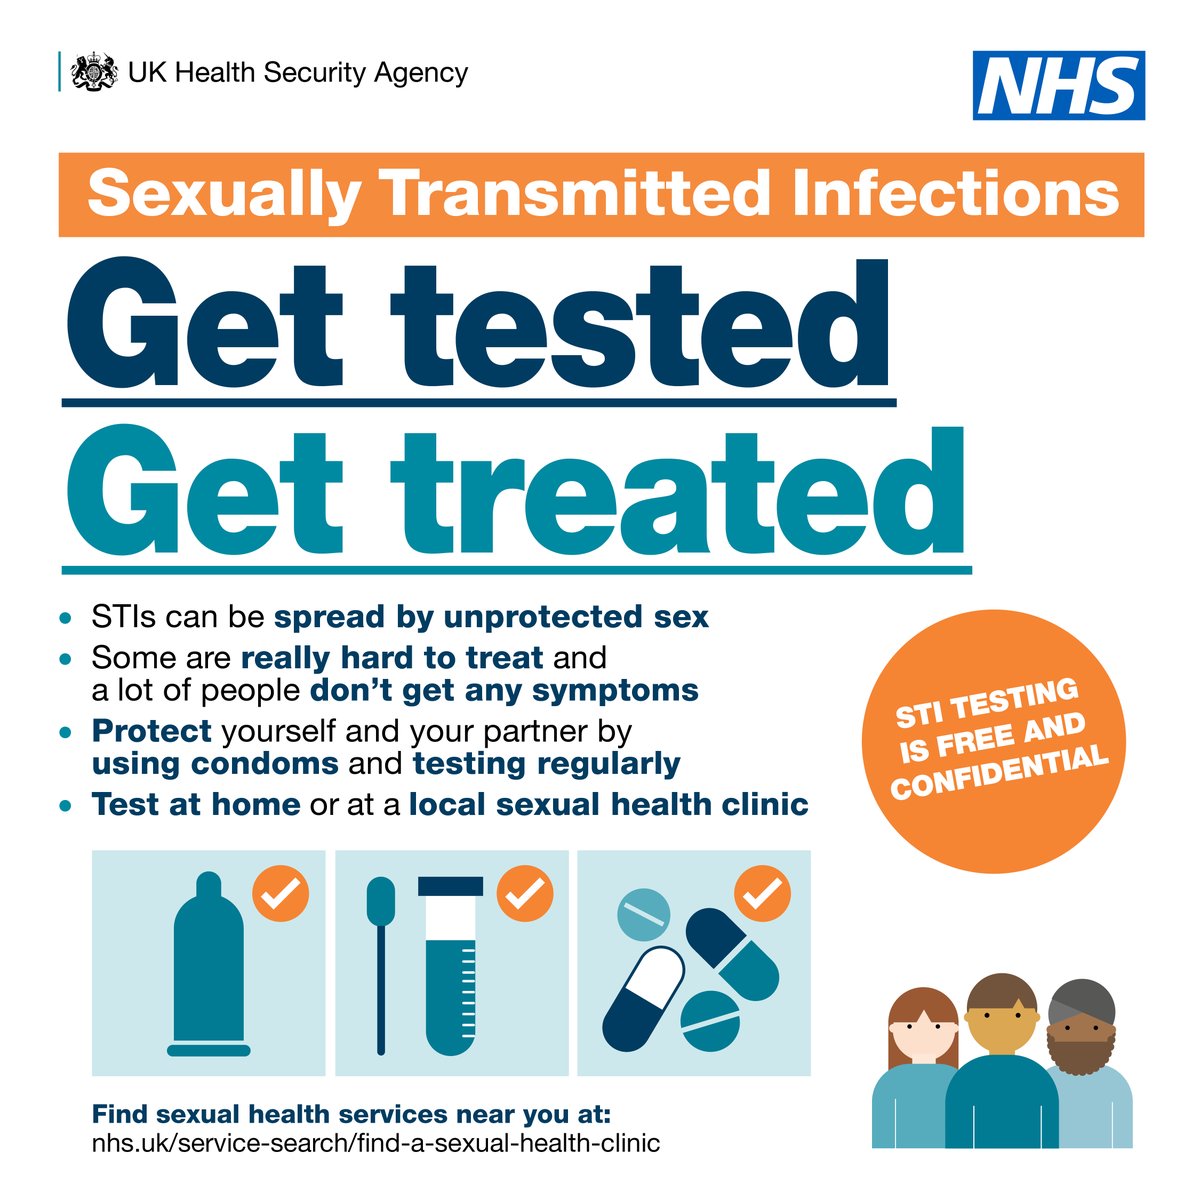 Testing for sexually transmitted infections (STIs) is free and confidential. Protect yourself and your partner by using condoms and testing regularly. Get tested, get treated. 🔗nhs.uk/service-search…